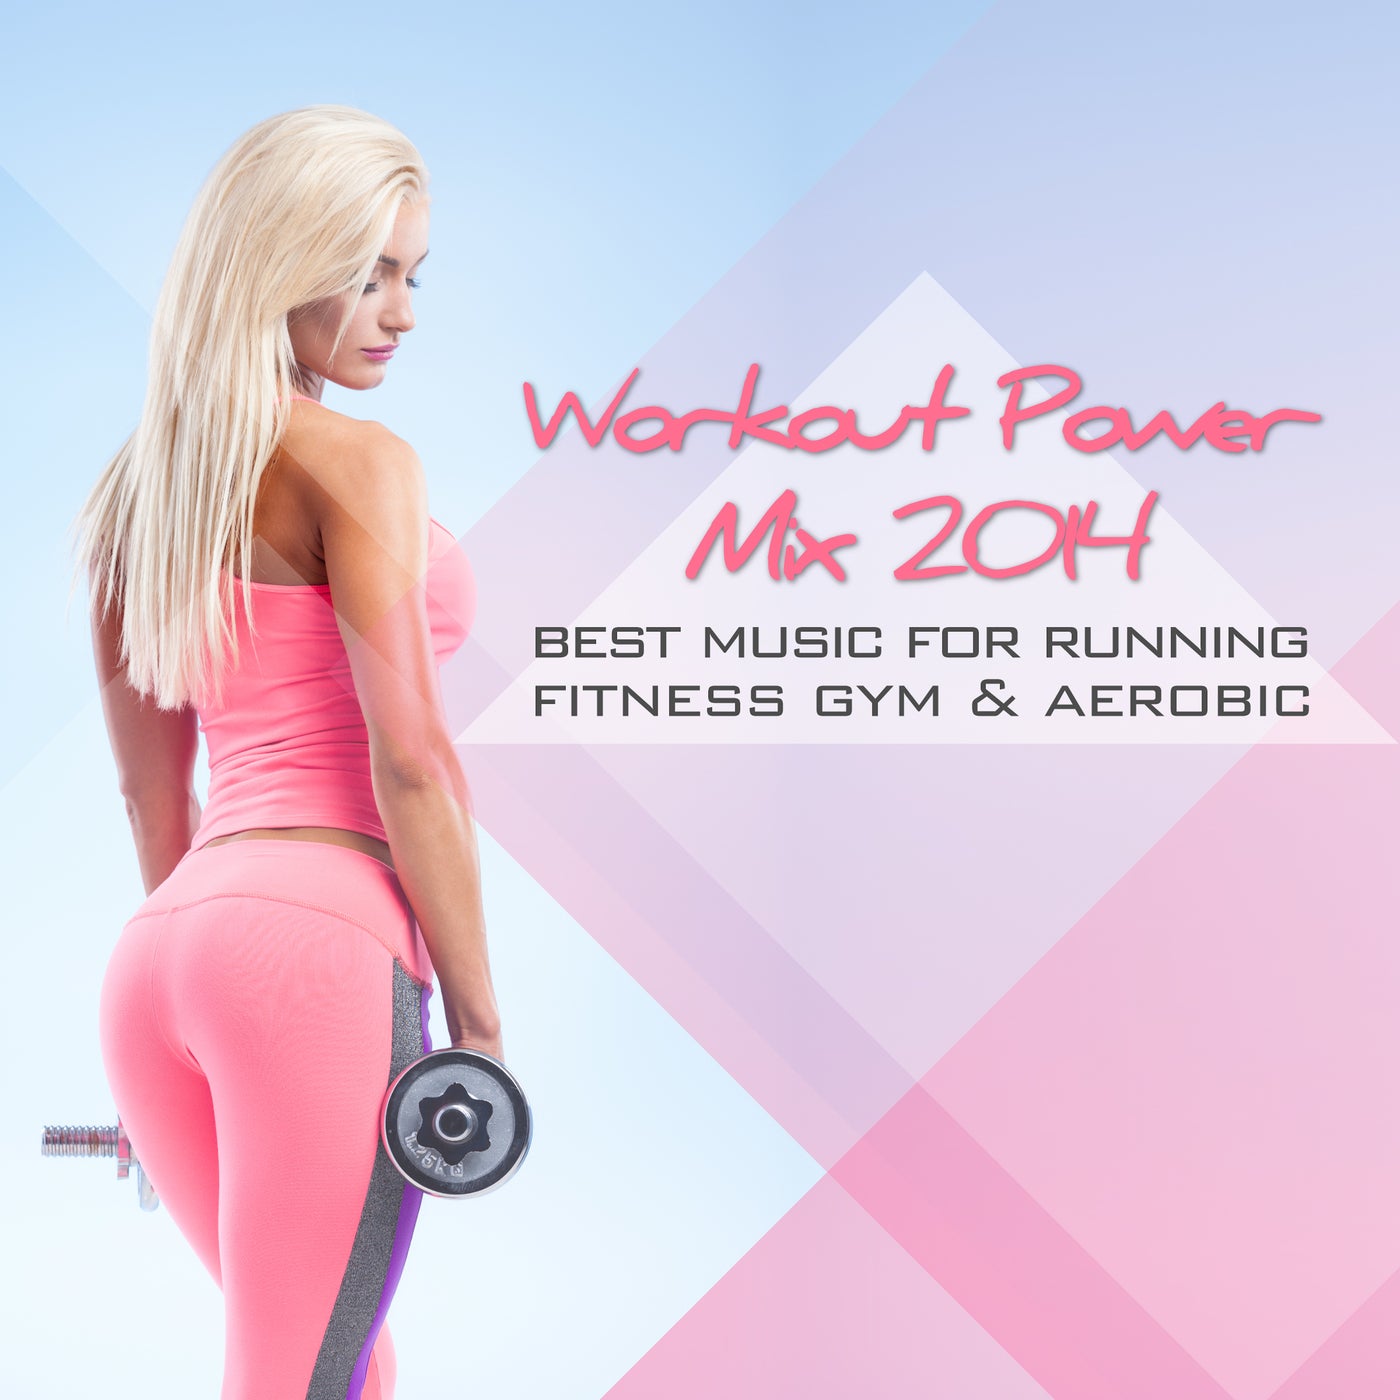 Workout Power Mix 2014 - Best Music for Running Fitness Gym & Aerobic